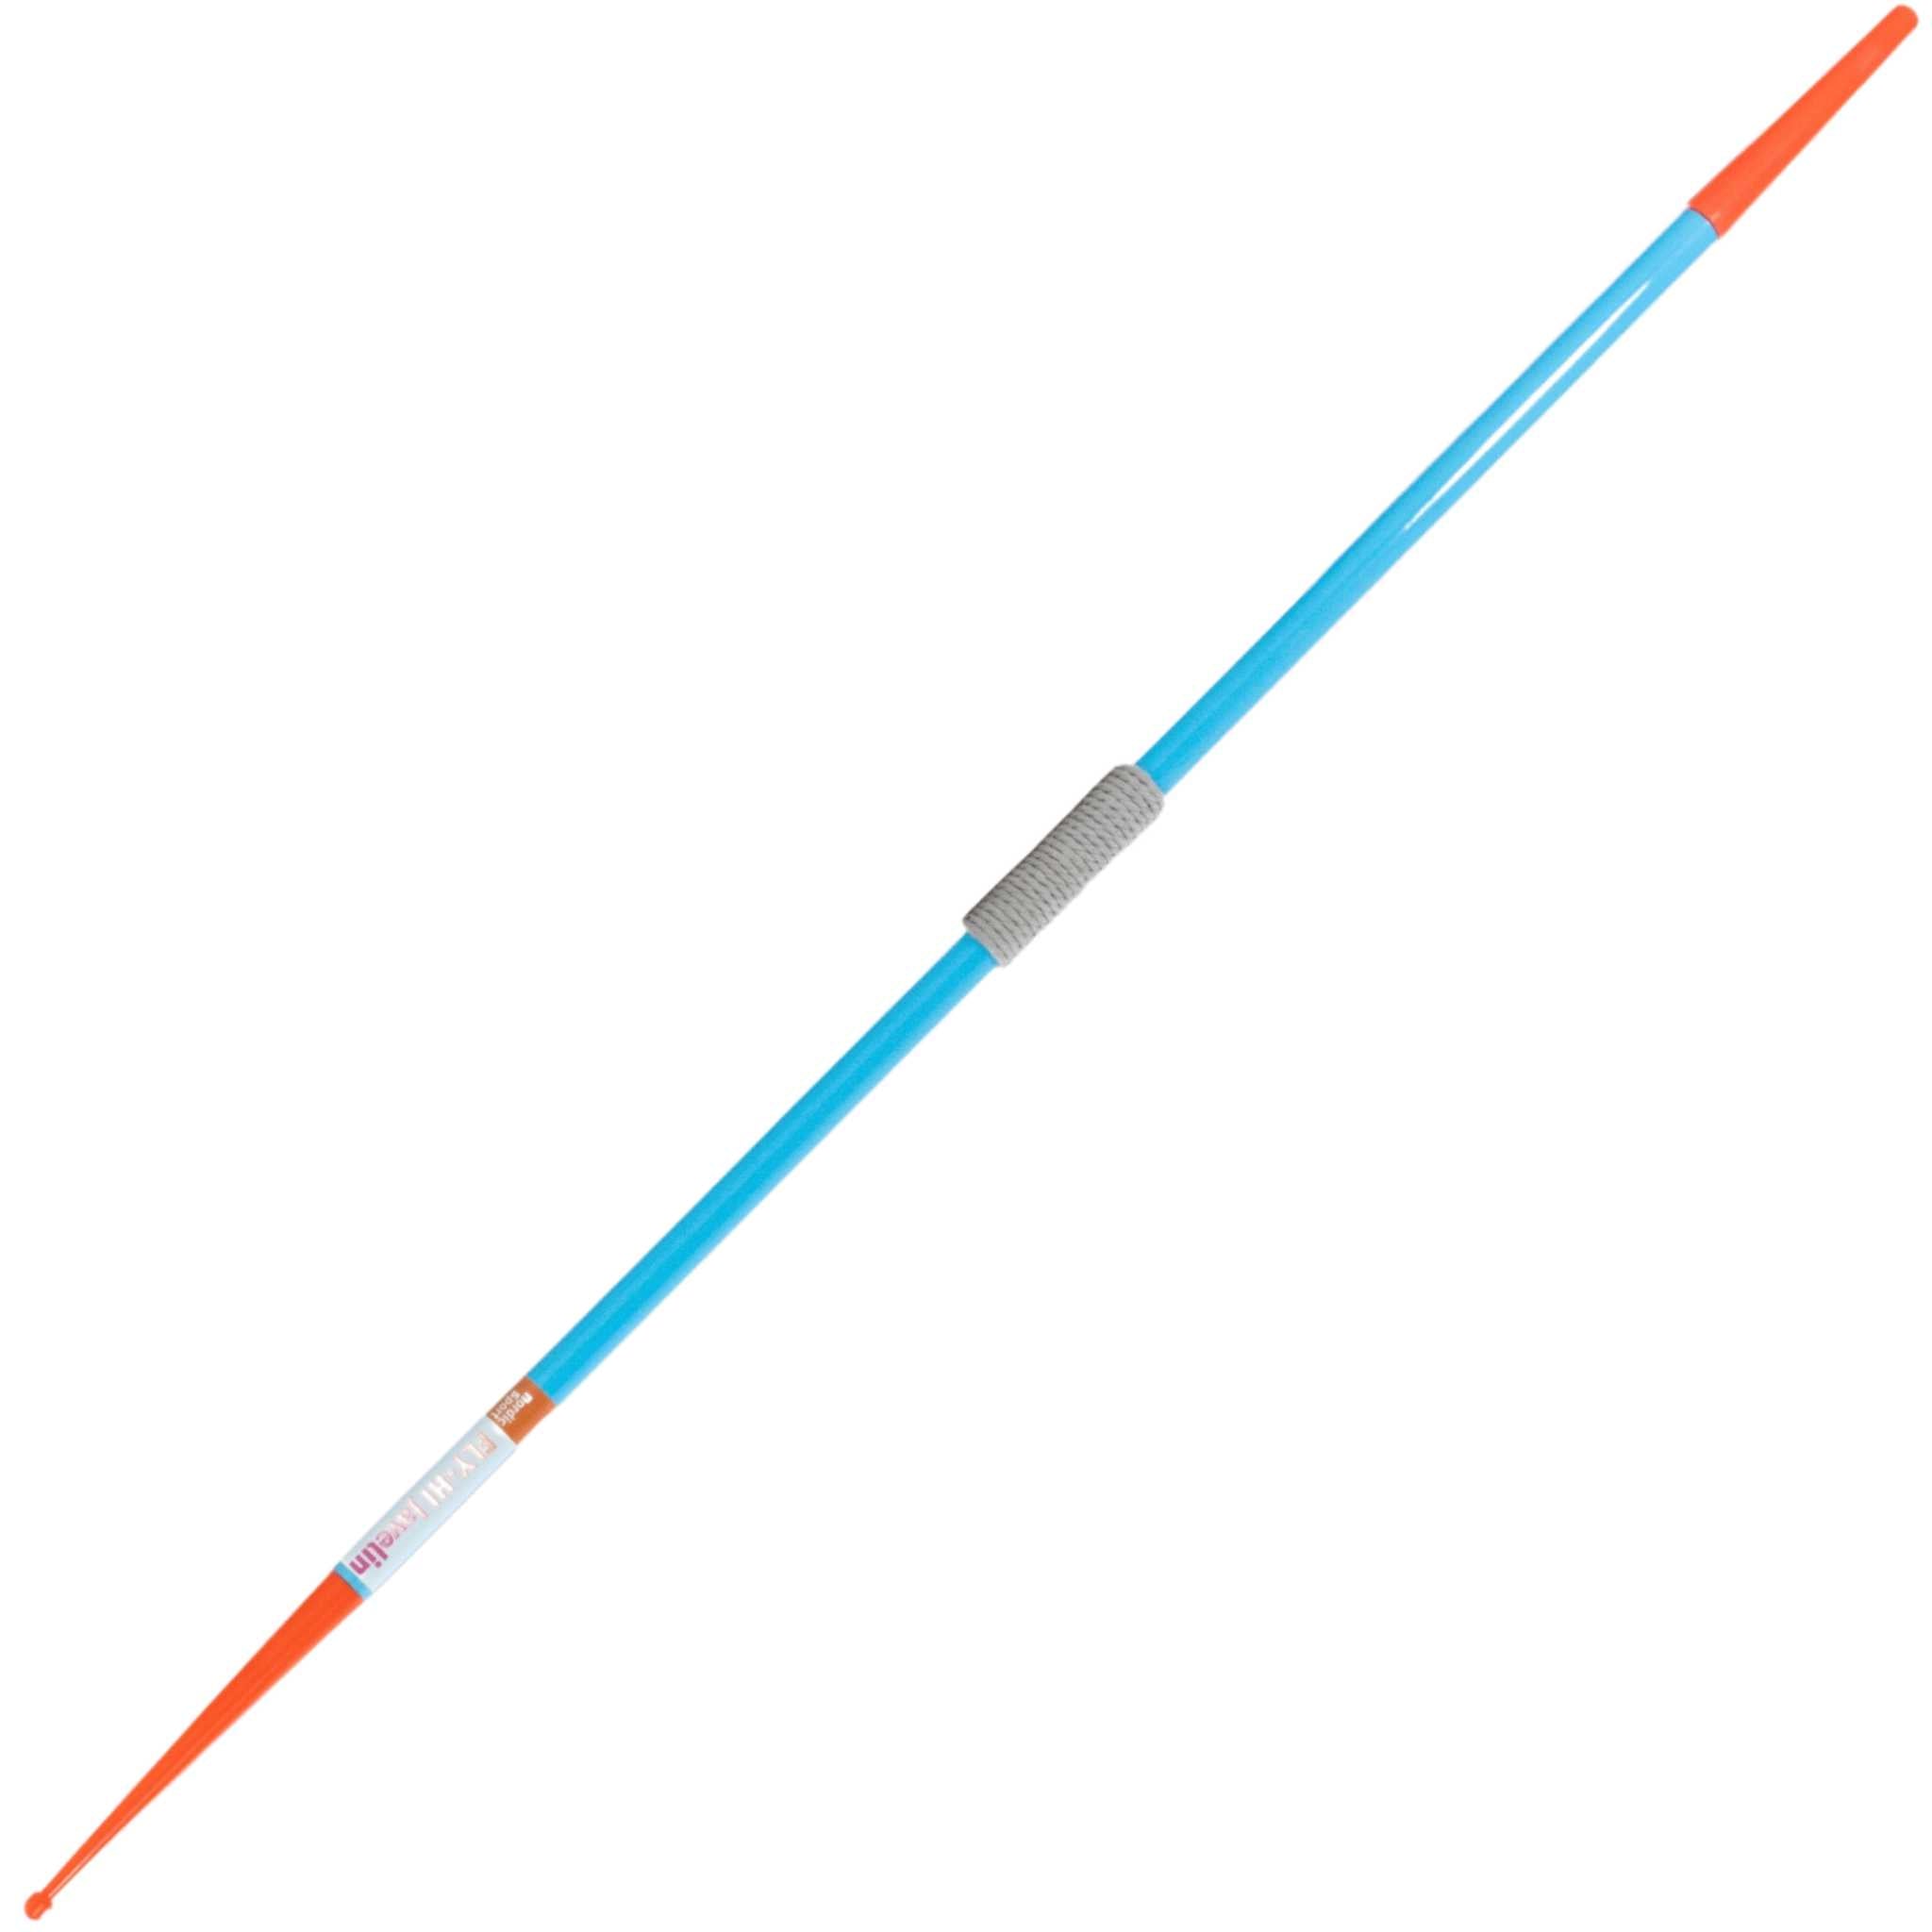 Nordic Fly-Hi Javelin | 270g | for children, kids and schools | blue metal body with orange moulded plastic safety tip and tail